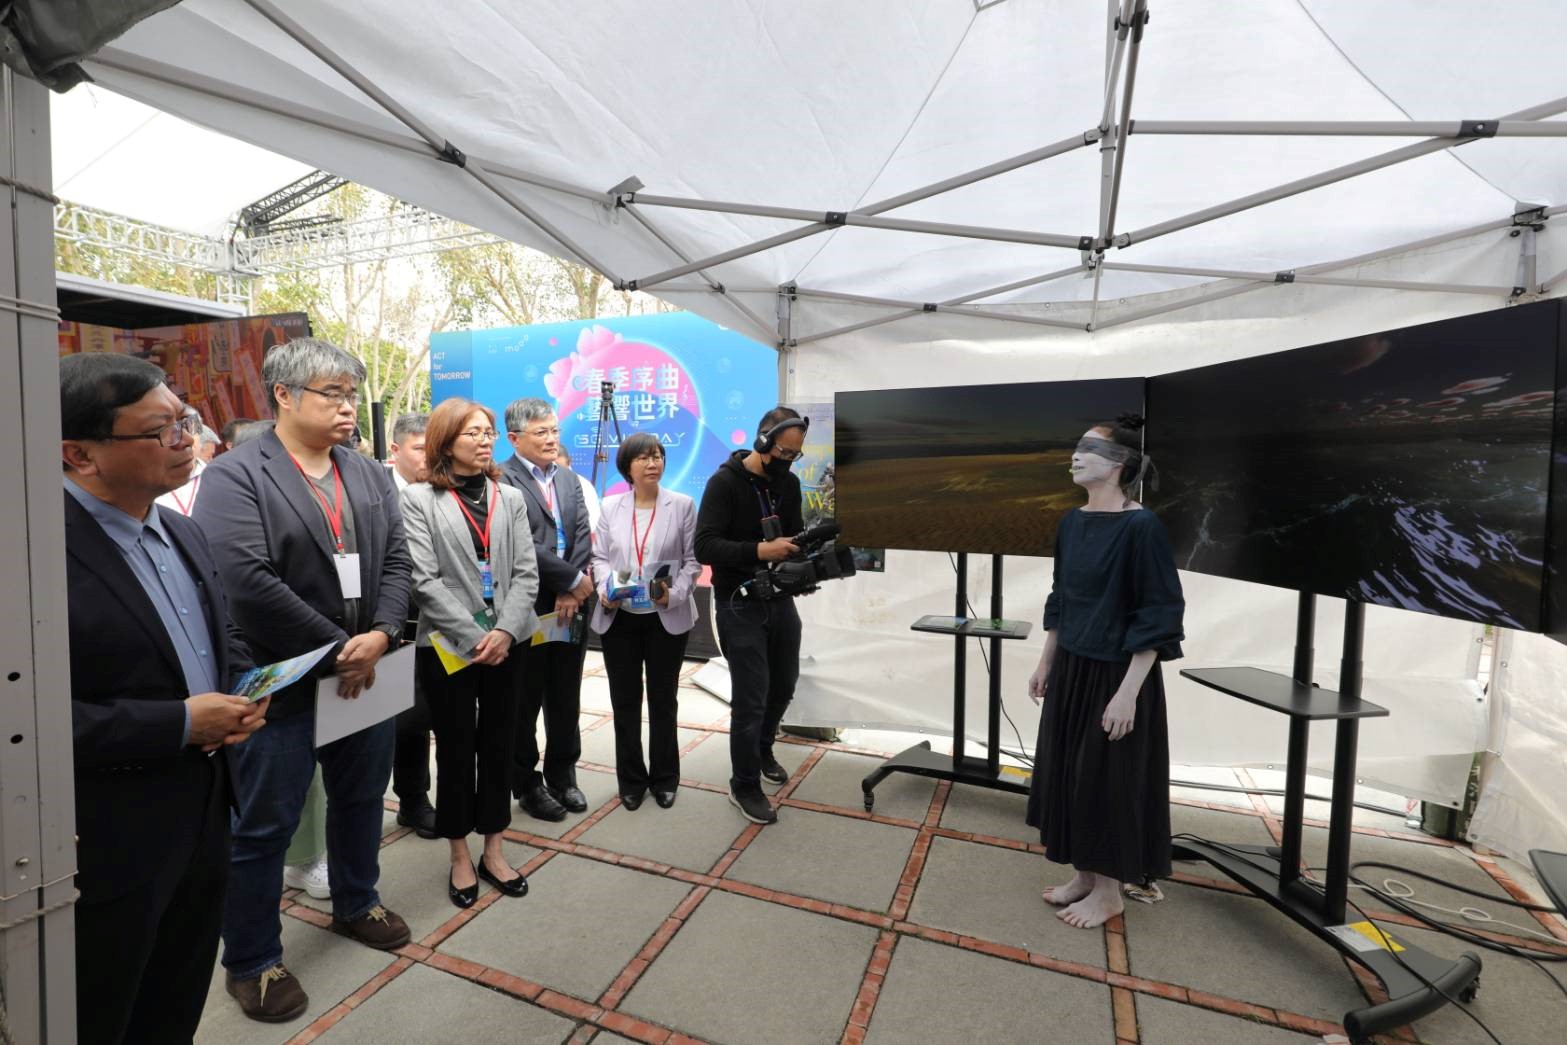 Lee Huai-jen, the Deputy Minister of moda, Betty Hu, the Deputy Director-General of the Administration for Digital Industries (ADI) of moda and Lee Lien-chuan, the Vice Minister of the Ministry of Culture joined the tour to try out the applications in the demo area.